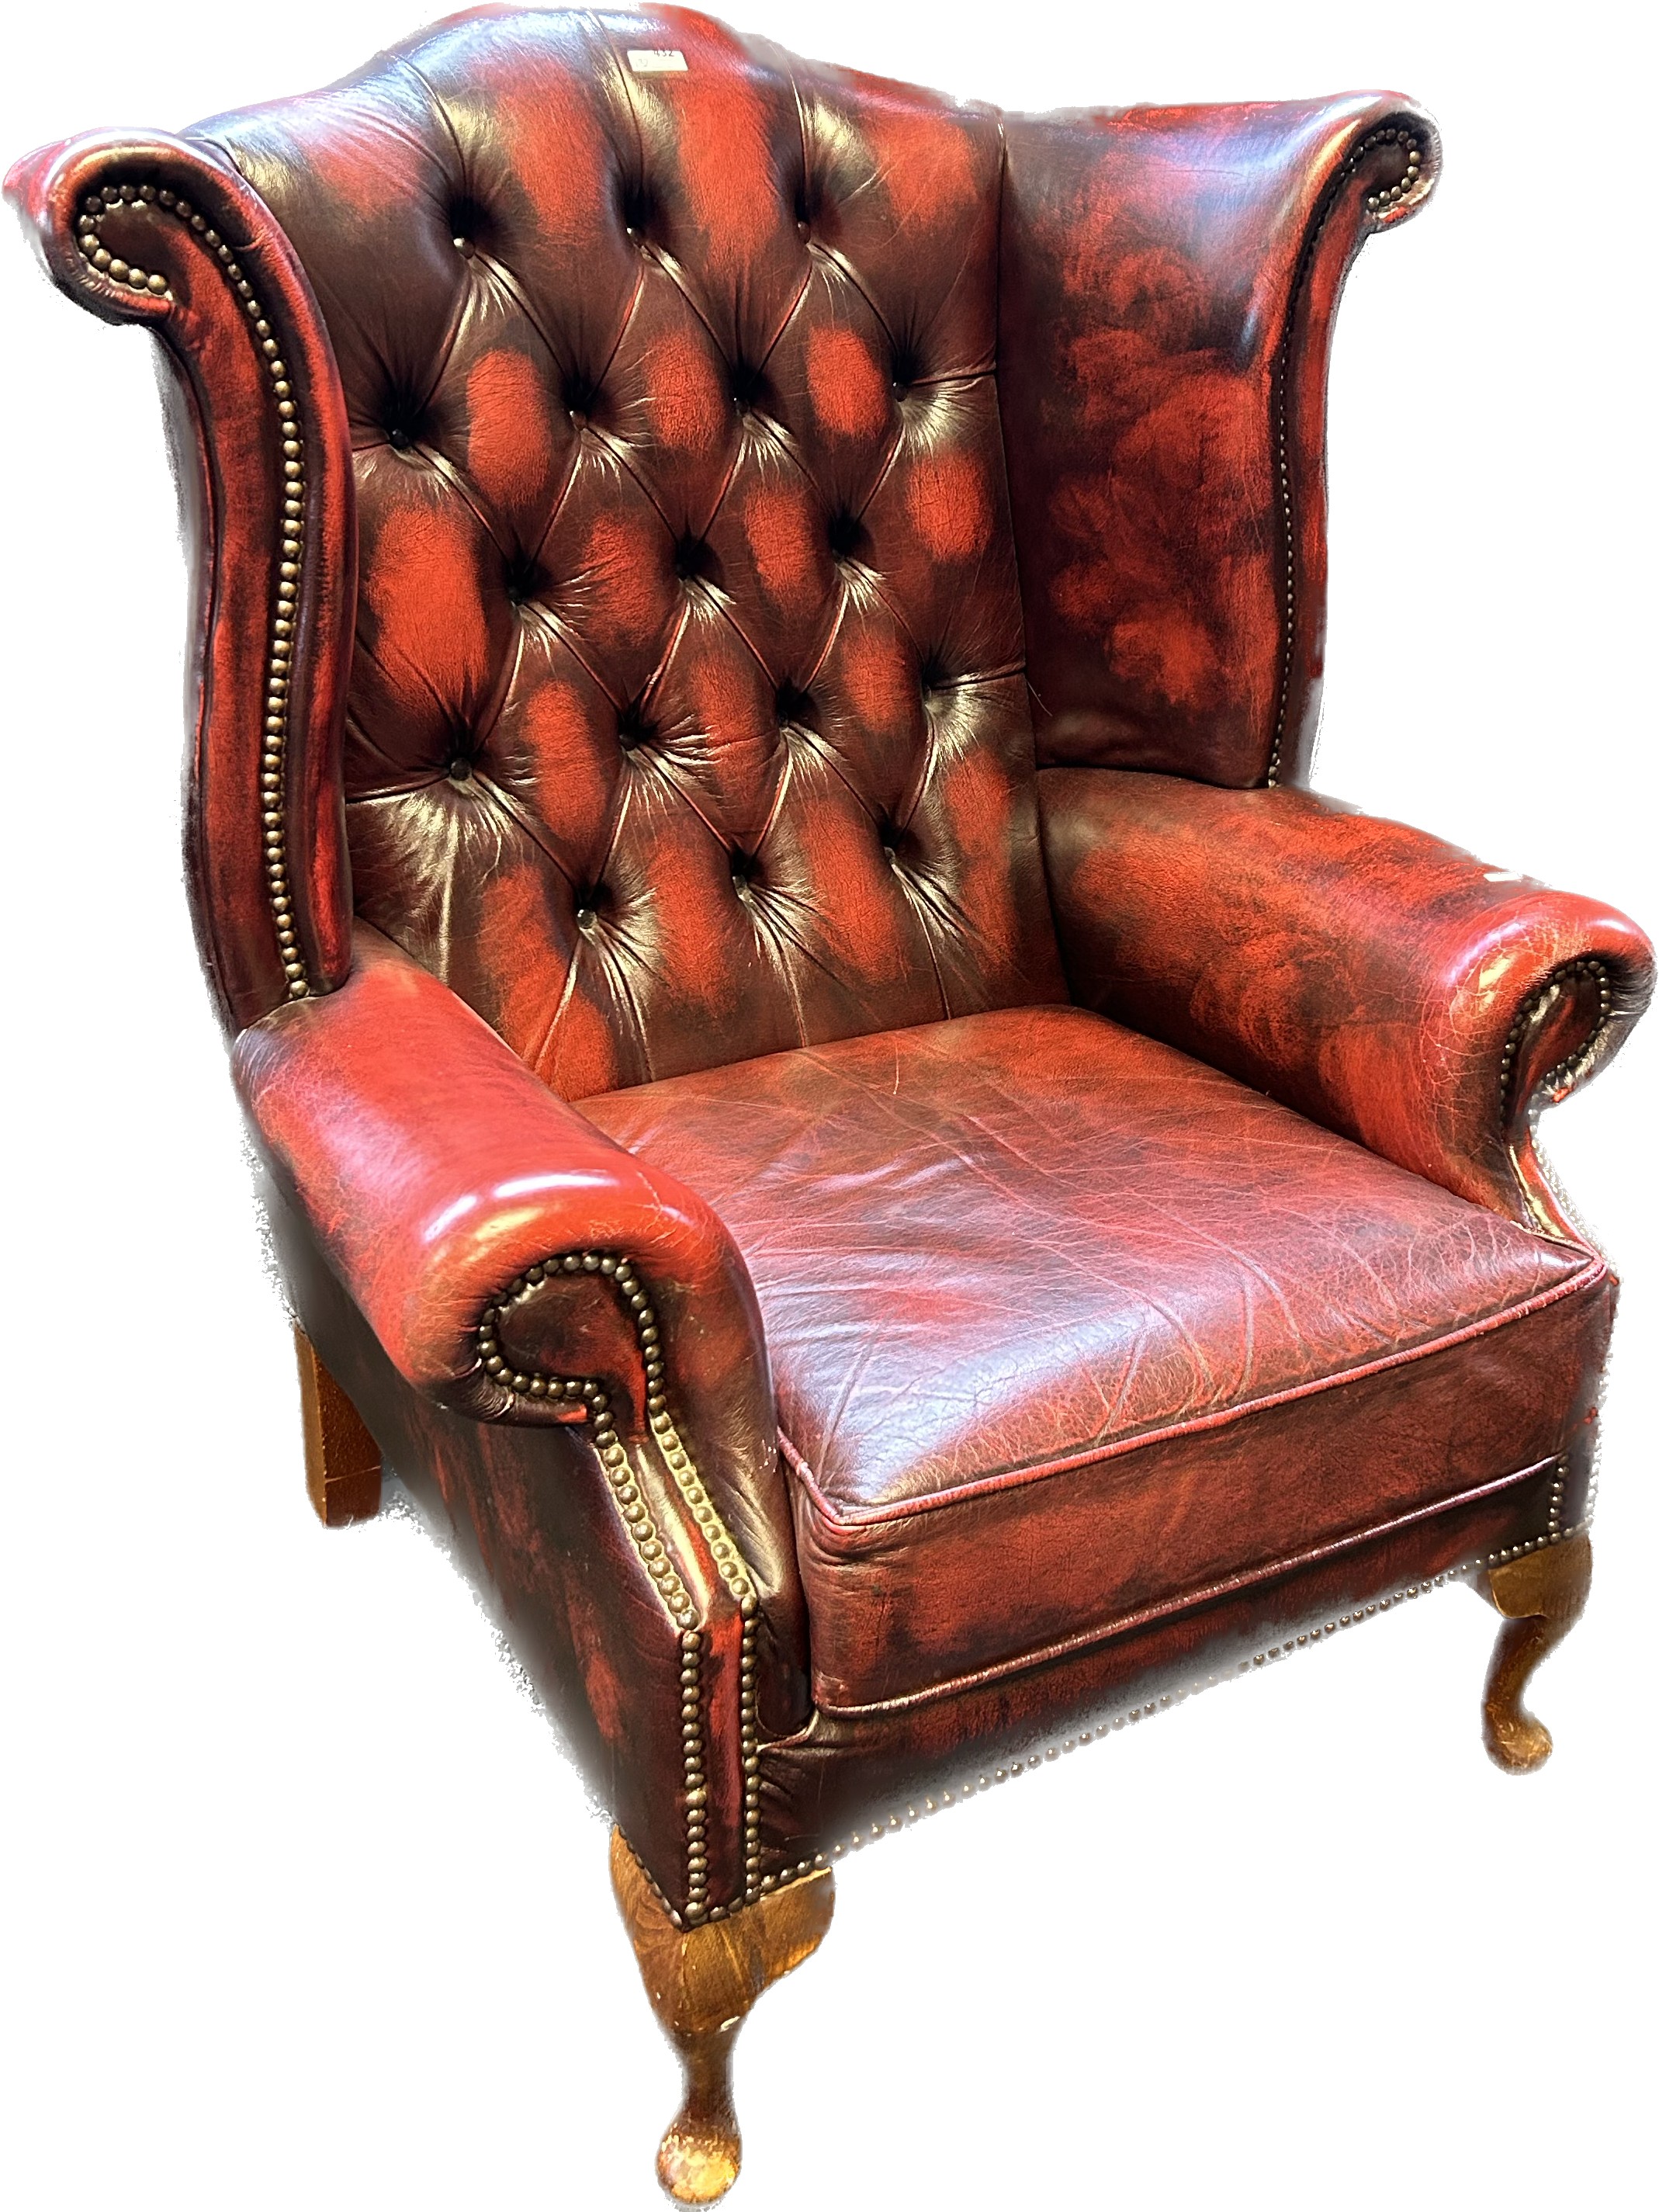 Chesterfield Gullwing chair, covered in a red leather button upholstery - Image 3 of 3